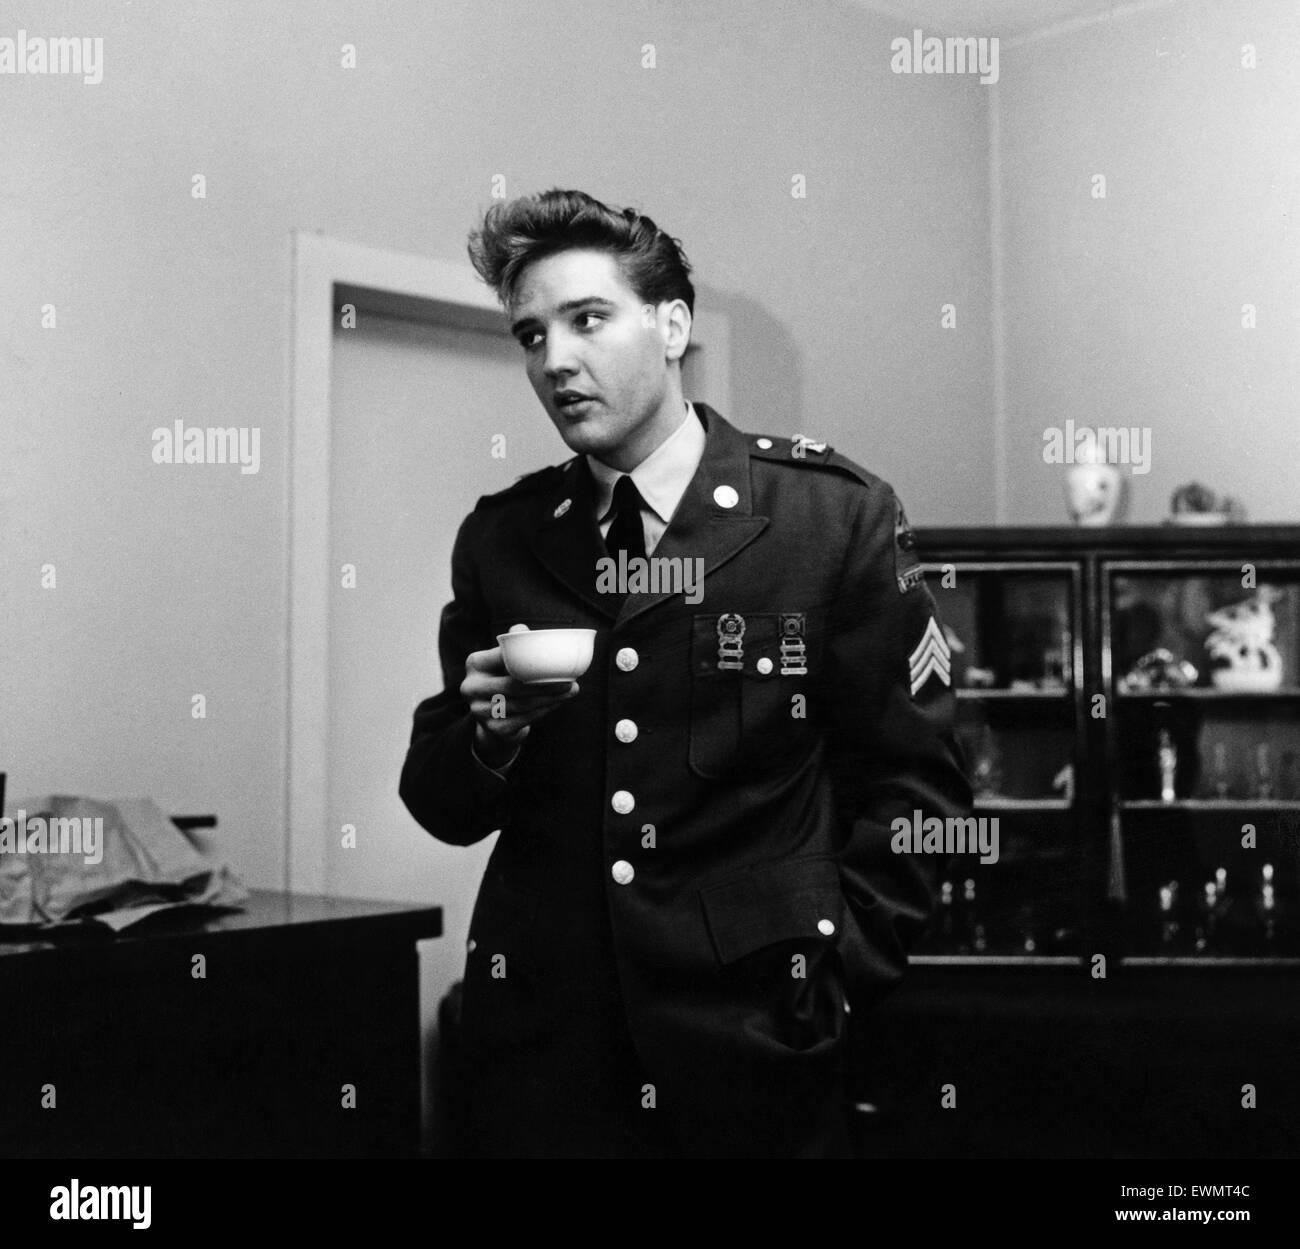 American rock and roll singer and musician Elvis Presley pictured wearing army uniform before attending a press conference in Germany. March 1960. Stock Photo